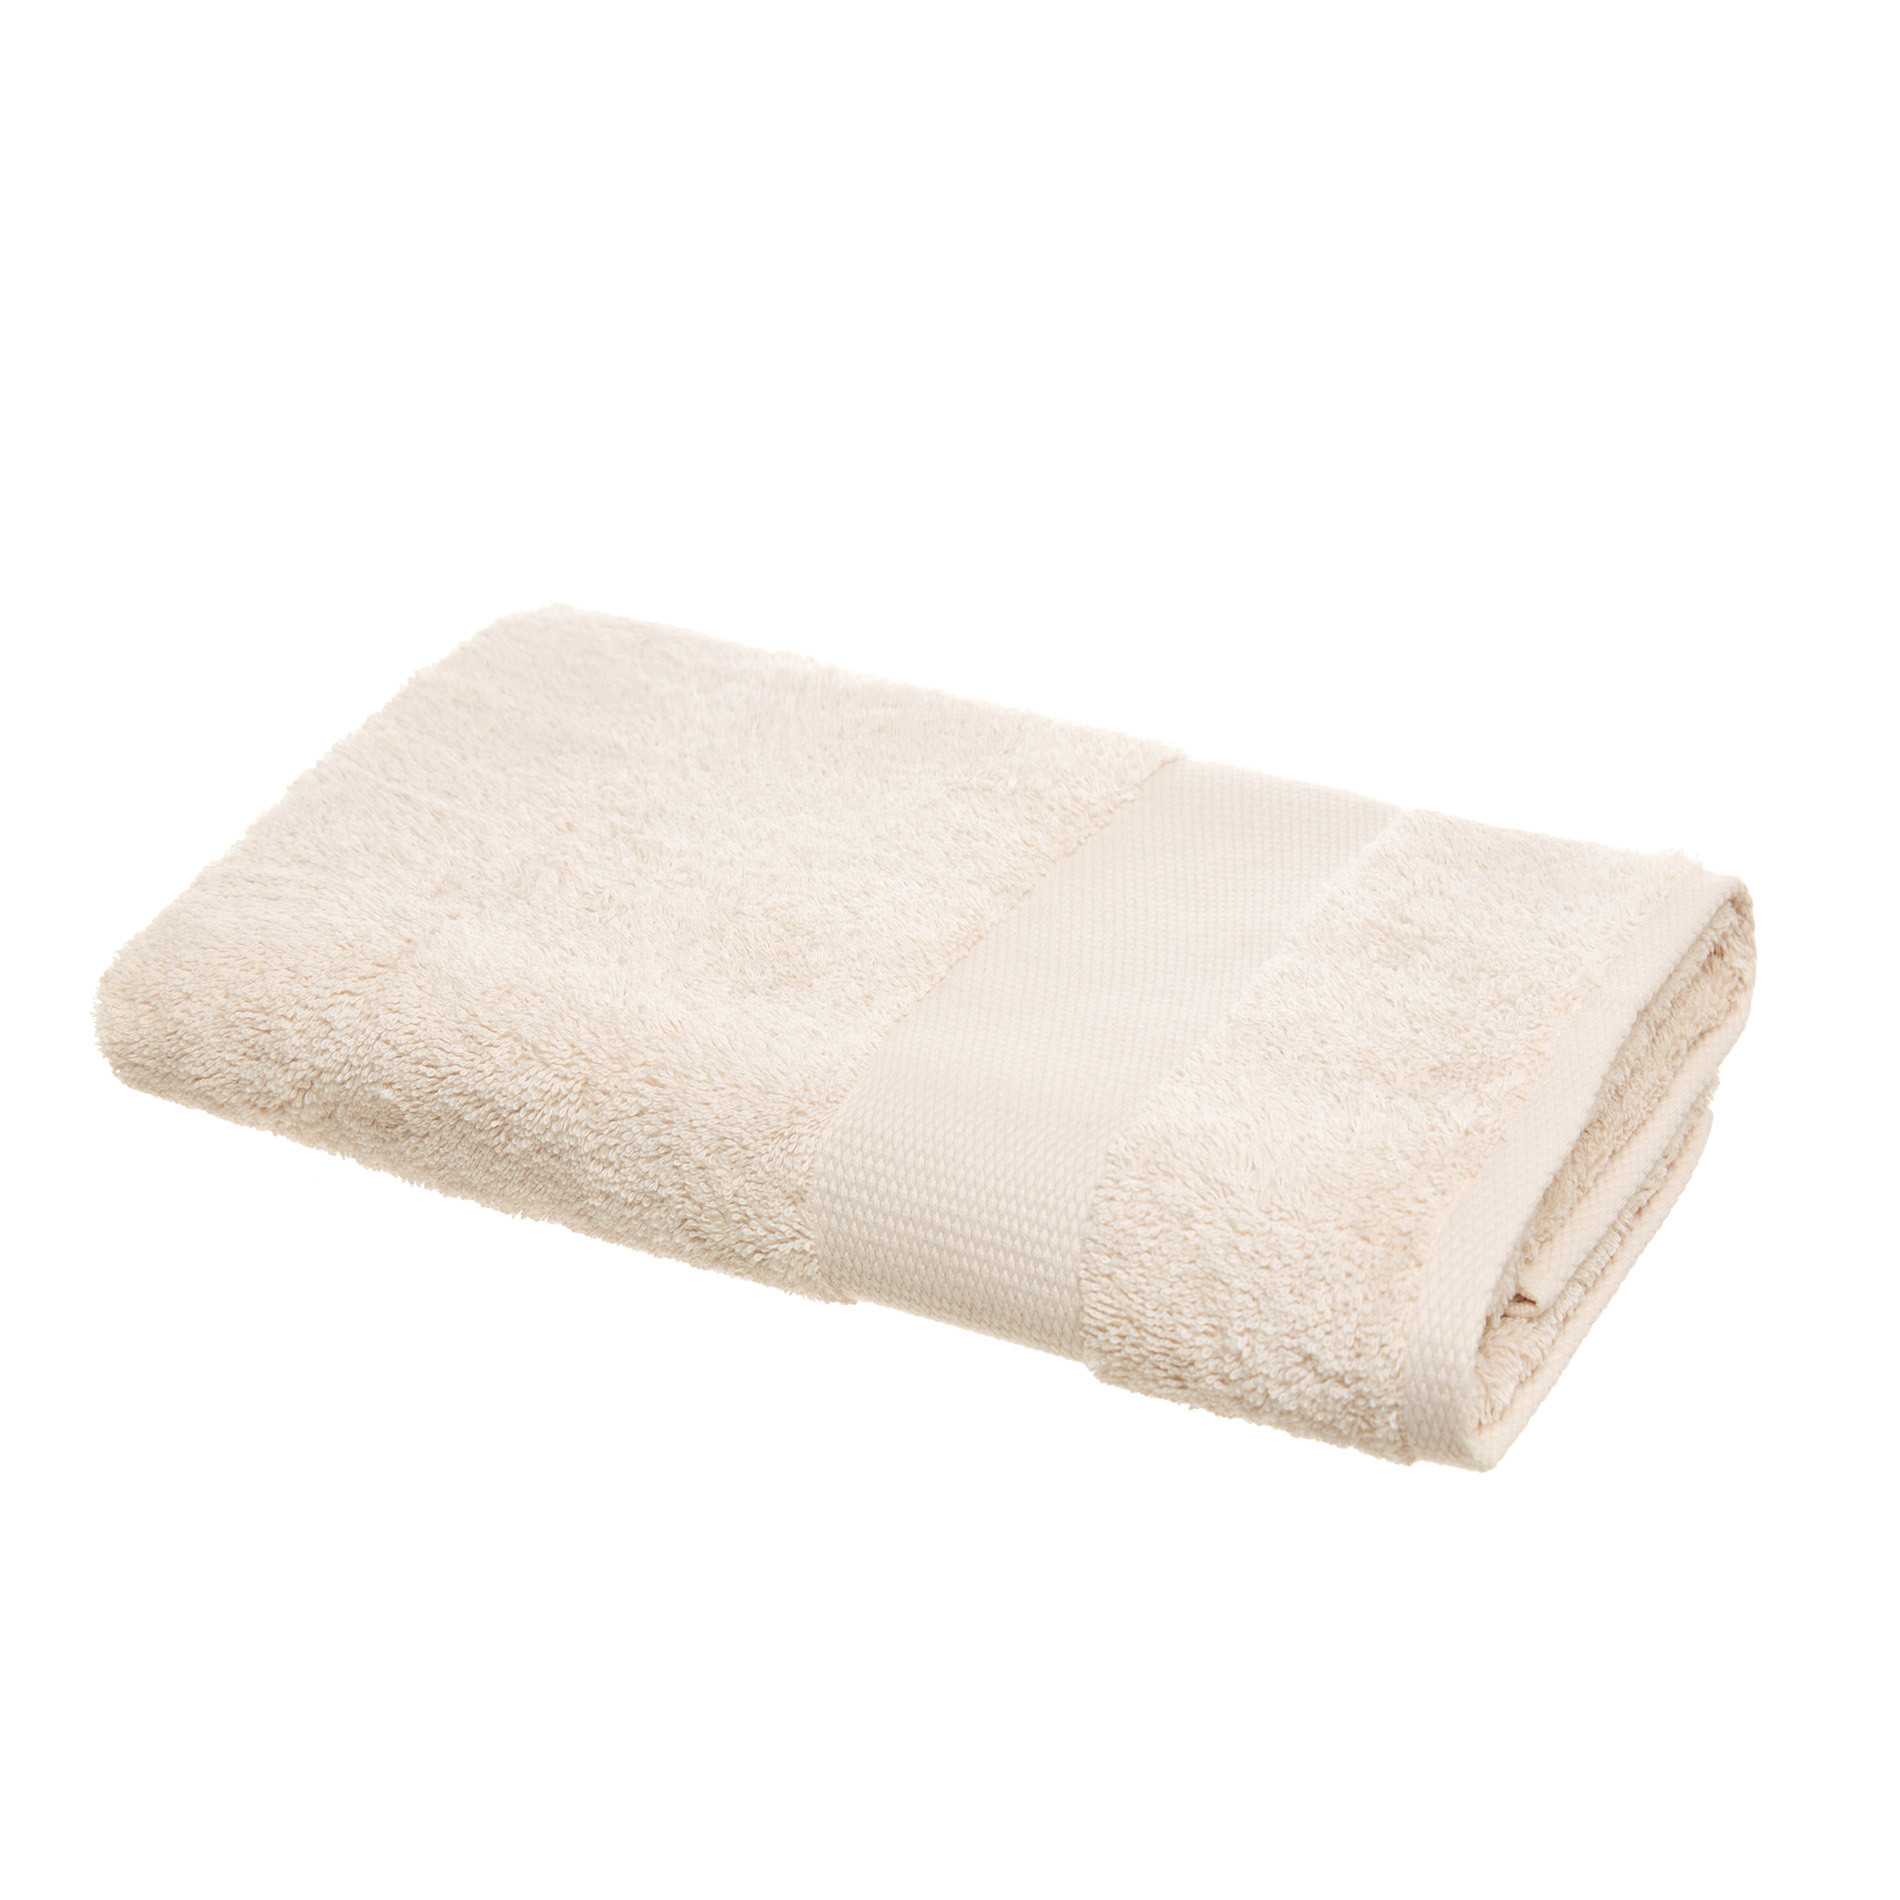 Zefiro pure cotton terry towel, Nougat Beige, large image number 1